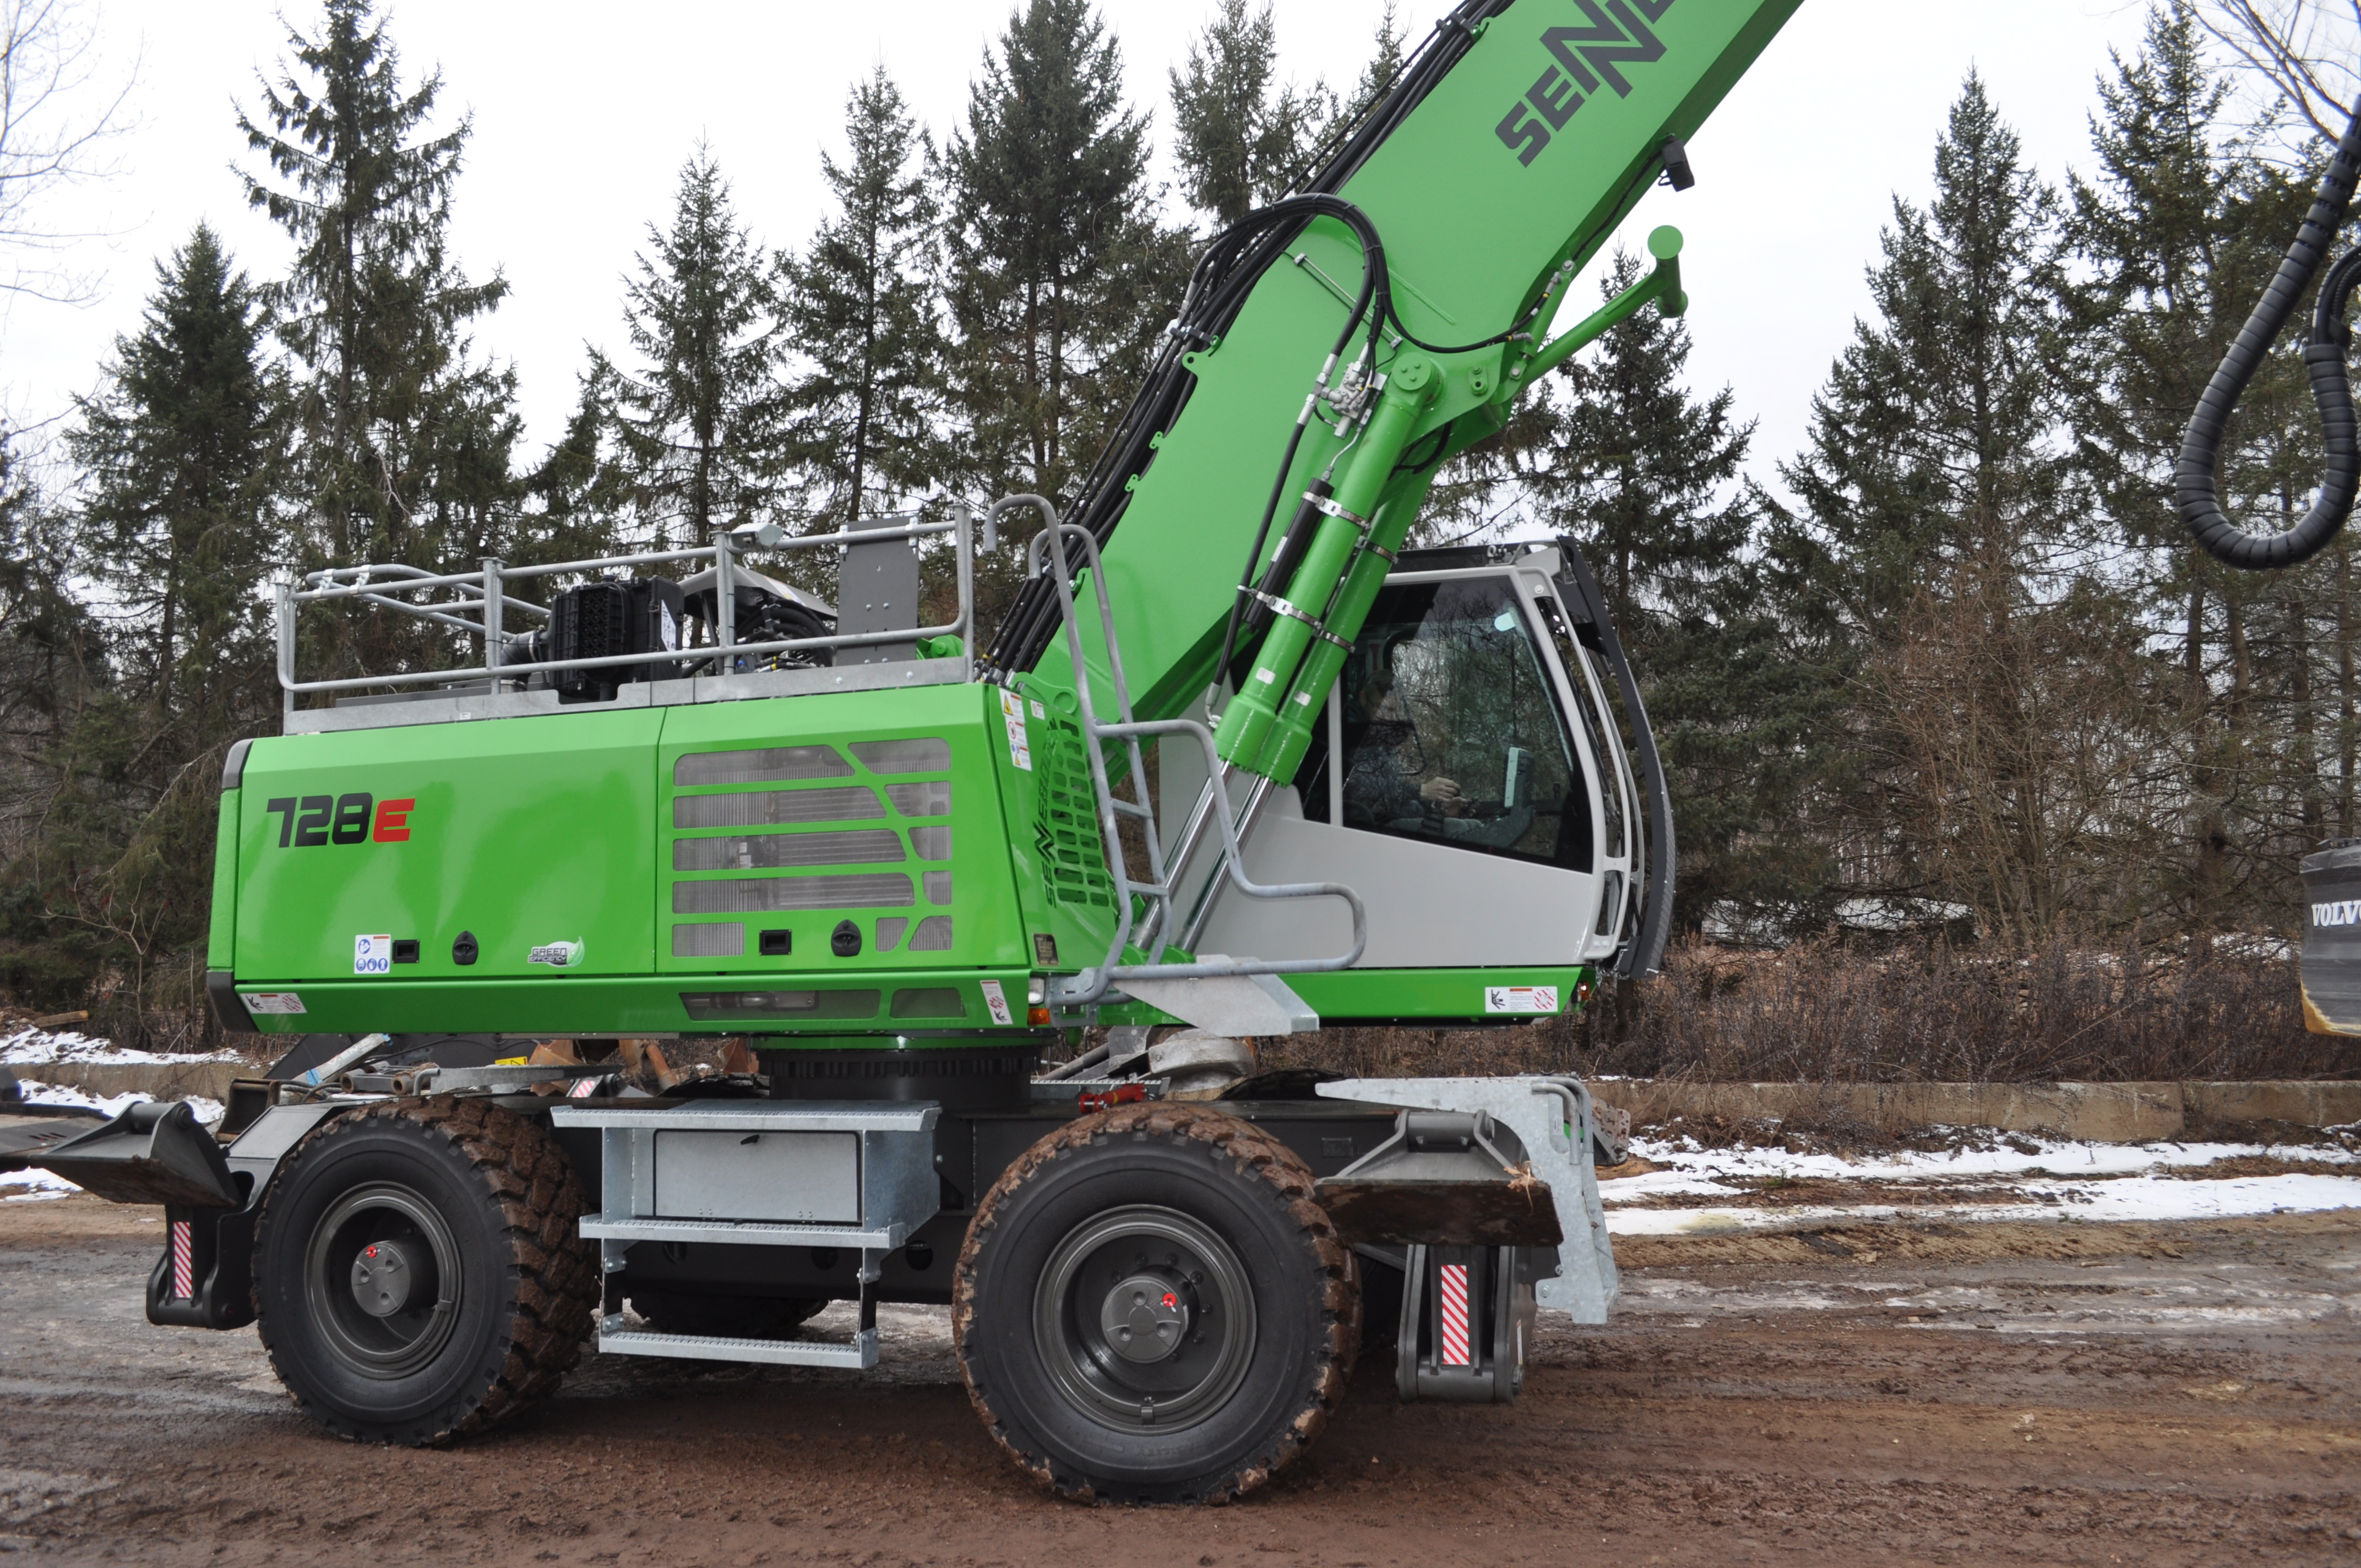 SENNEBOGEN 728 M with rubber tires allow for job-site mobility with the access and stability to reach and dismantle large trees at scale.